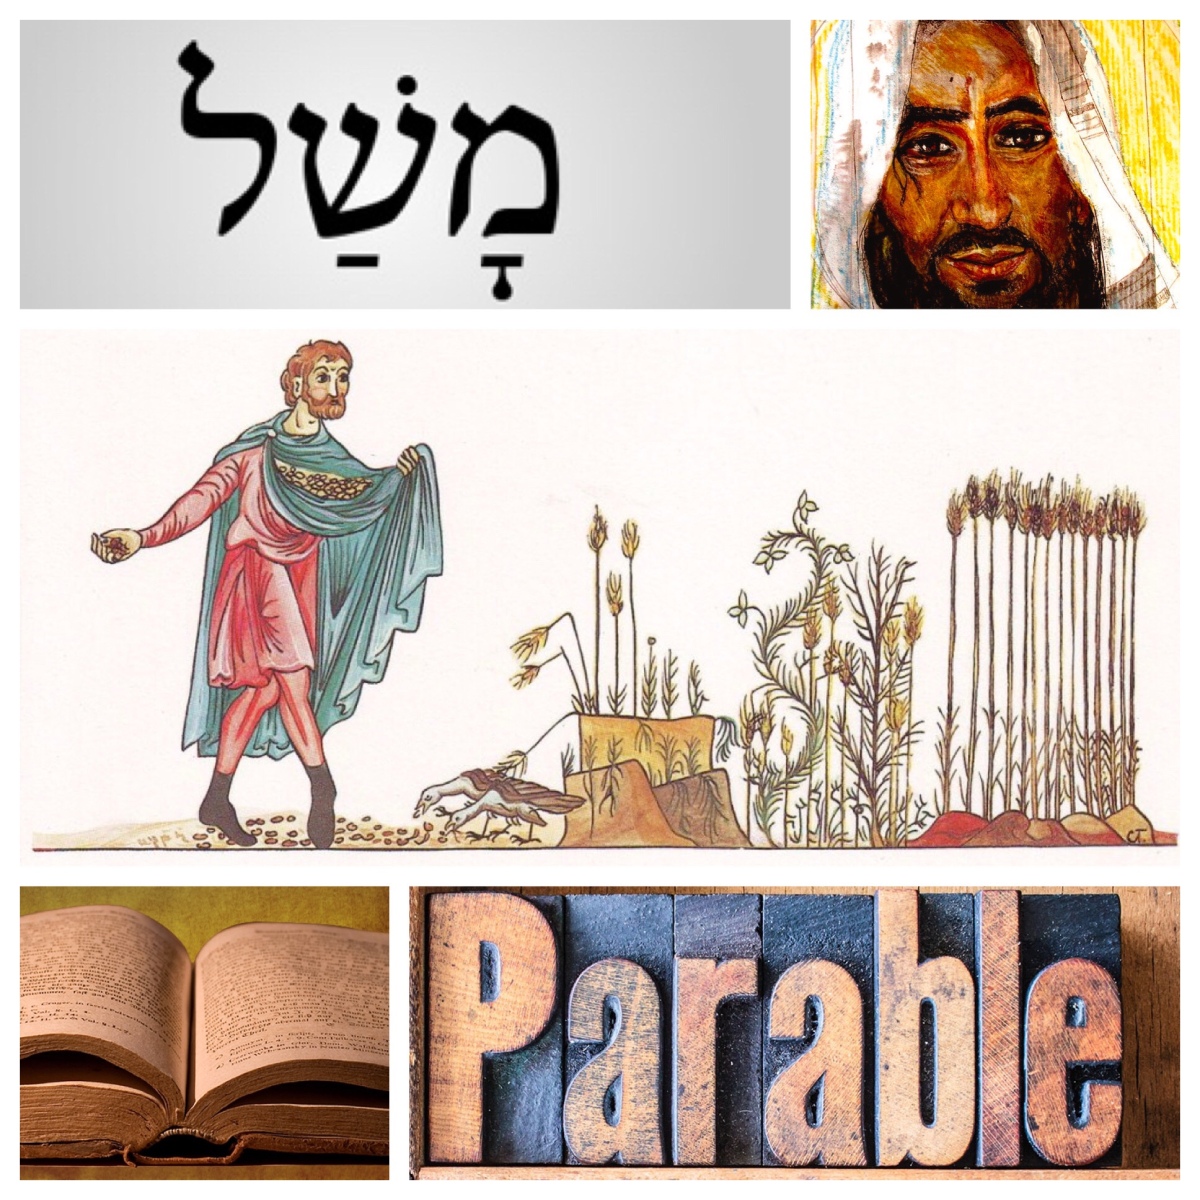 Parables, riddles, and allegories: the craft of Jewish storytelling (Matt 13; Pentecost 8A)